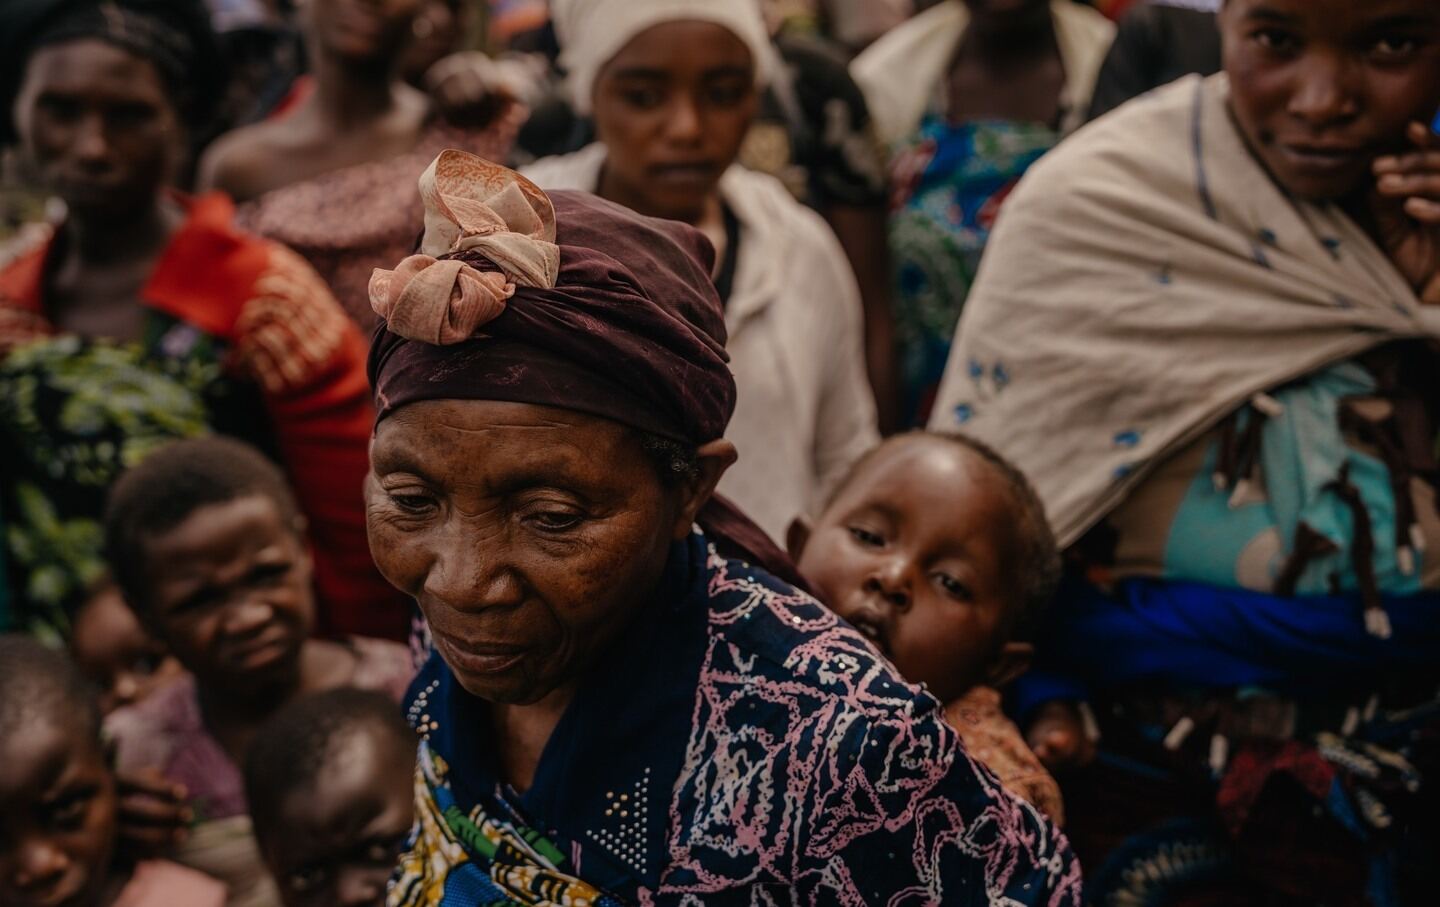 Marciane Ndamukunze, 68, arrives in Kizemba displacement camp, after fleeing heavy fighting in Masisi territory. 4th December 2023, North Kivu Province, DRC